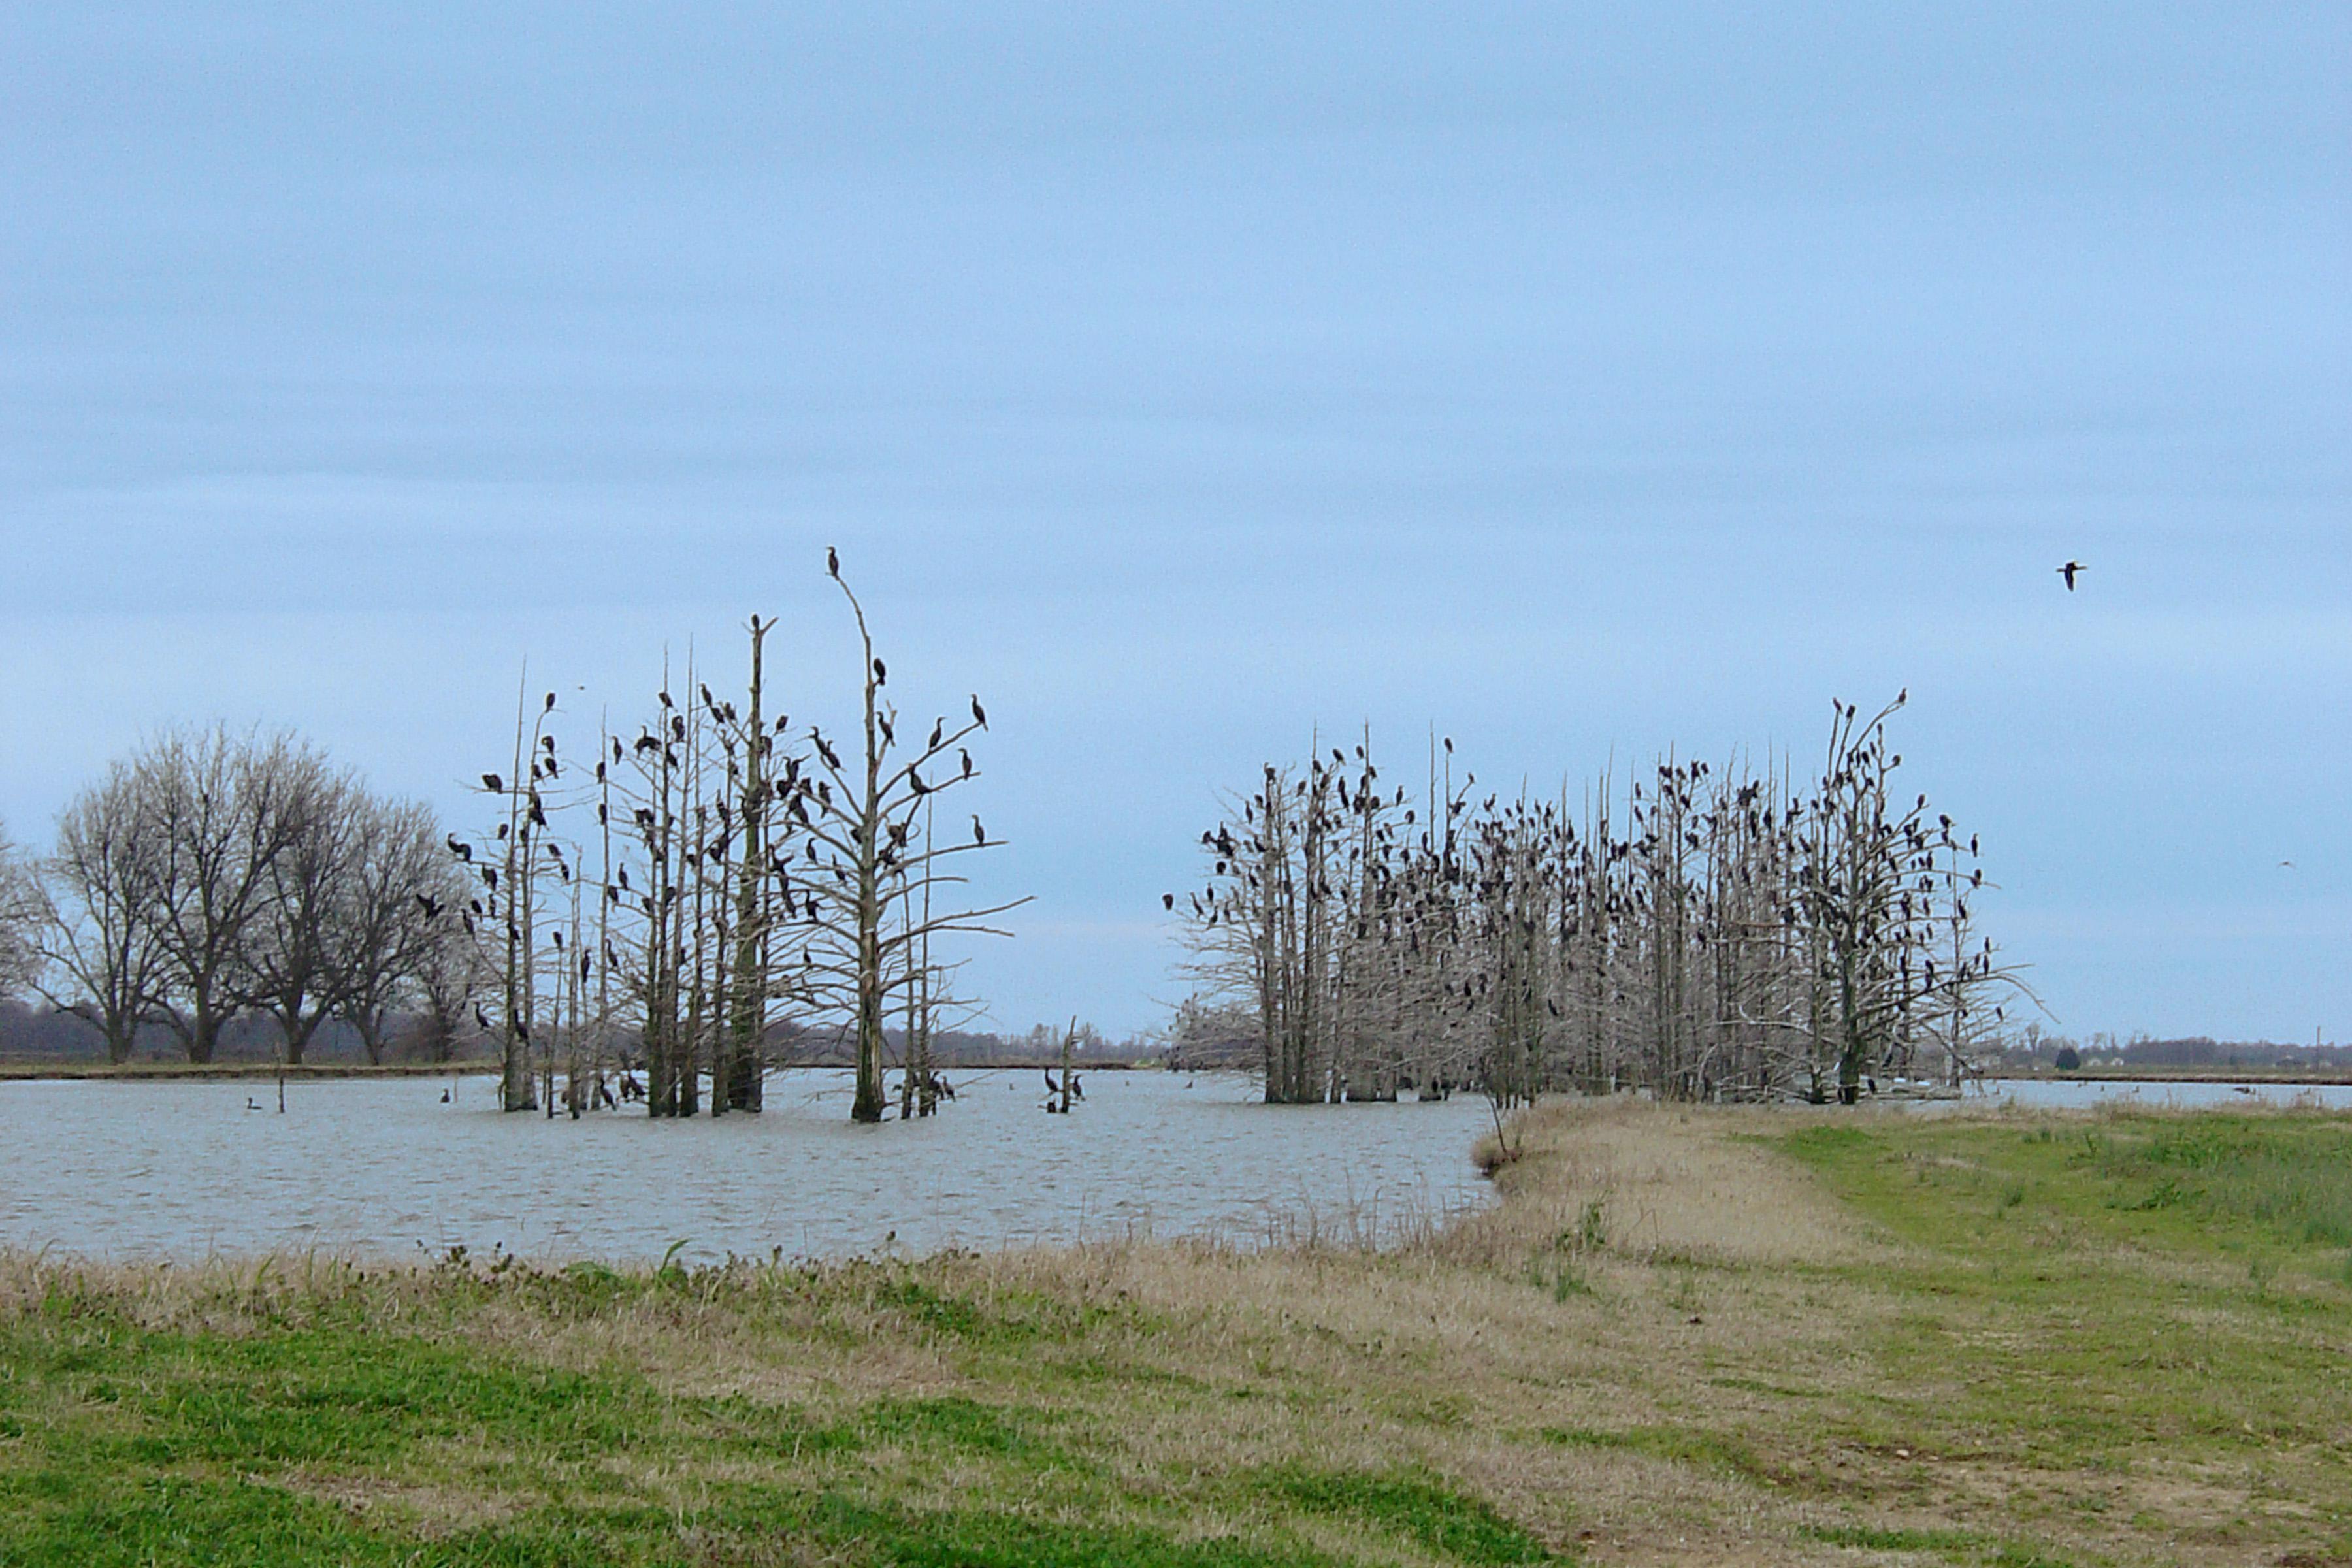 Large groups of cormorants typically roost at night in clusters of trees, such as these, and spend their days fishing in natural lakes, rivers and catfish ponds, to the dismay of Mississippi’s catfish producers. (File photo by MSU Extension Service)